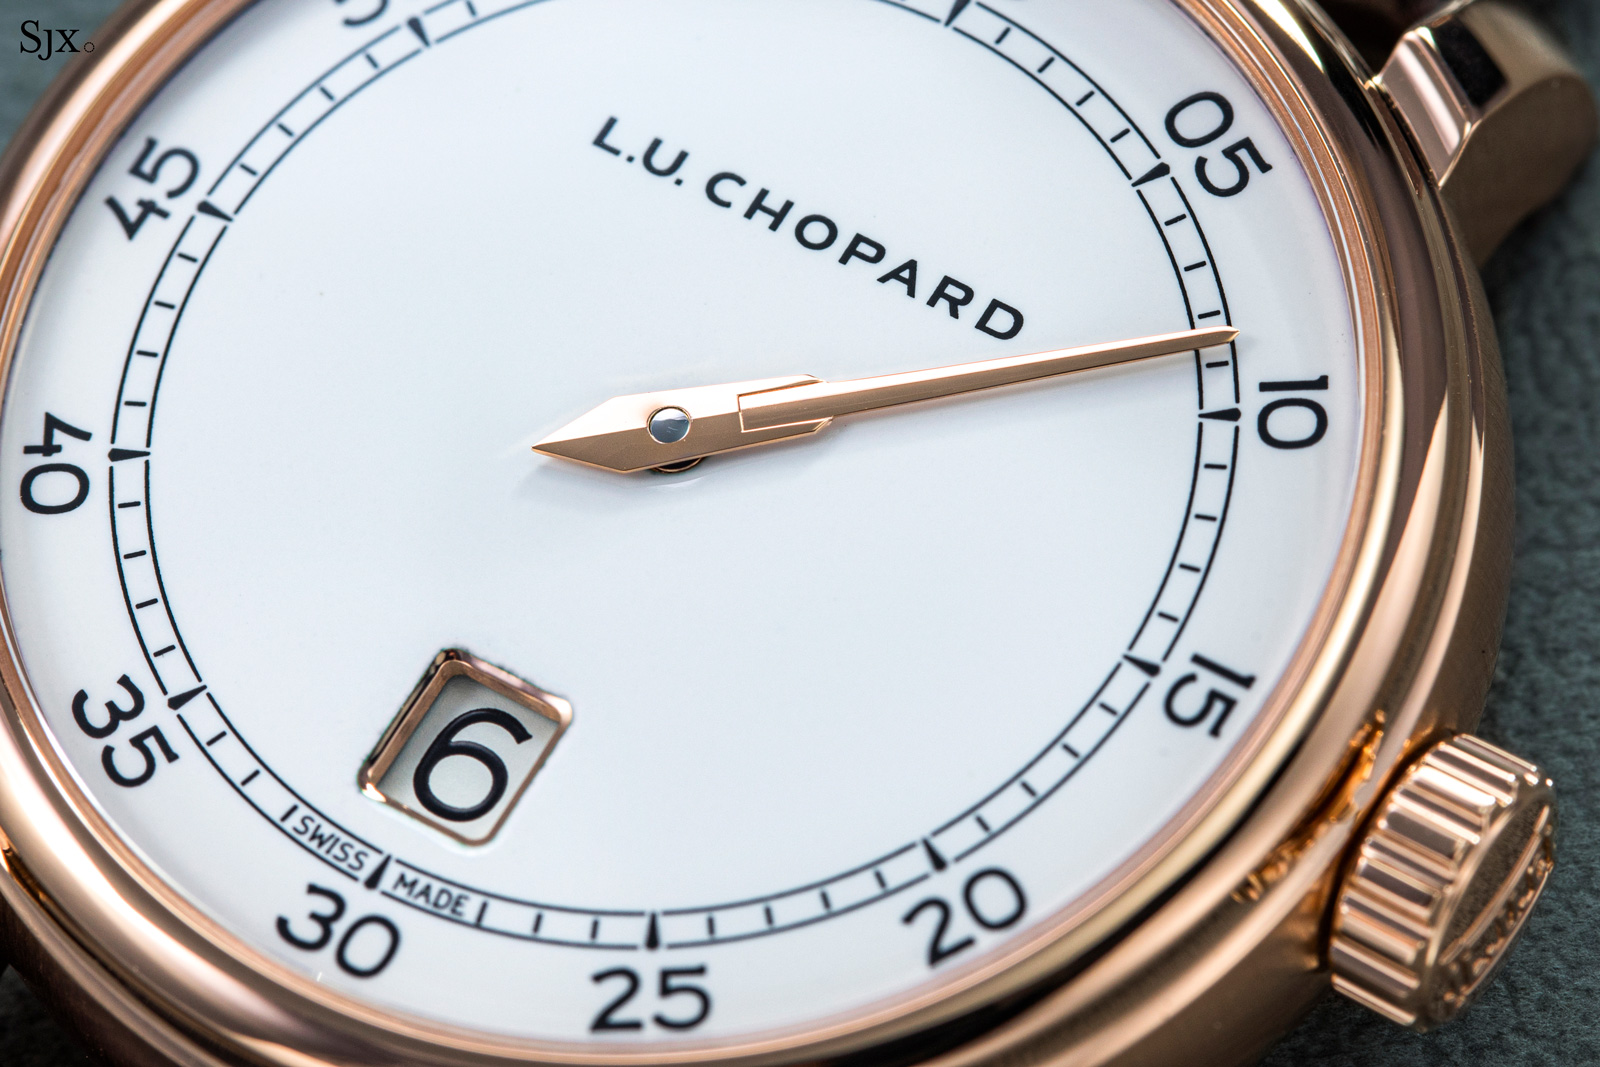 Award winning quality with vintage class - LUC Chopard 